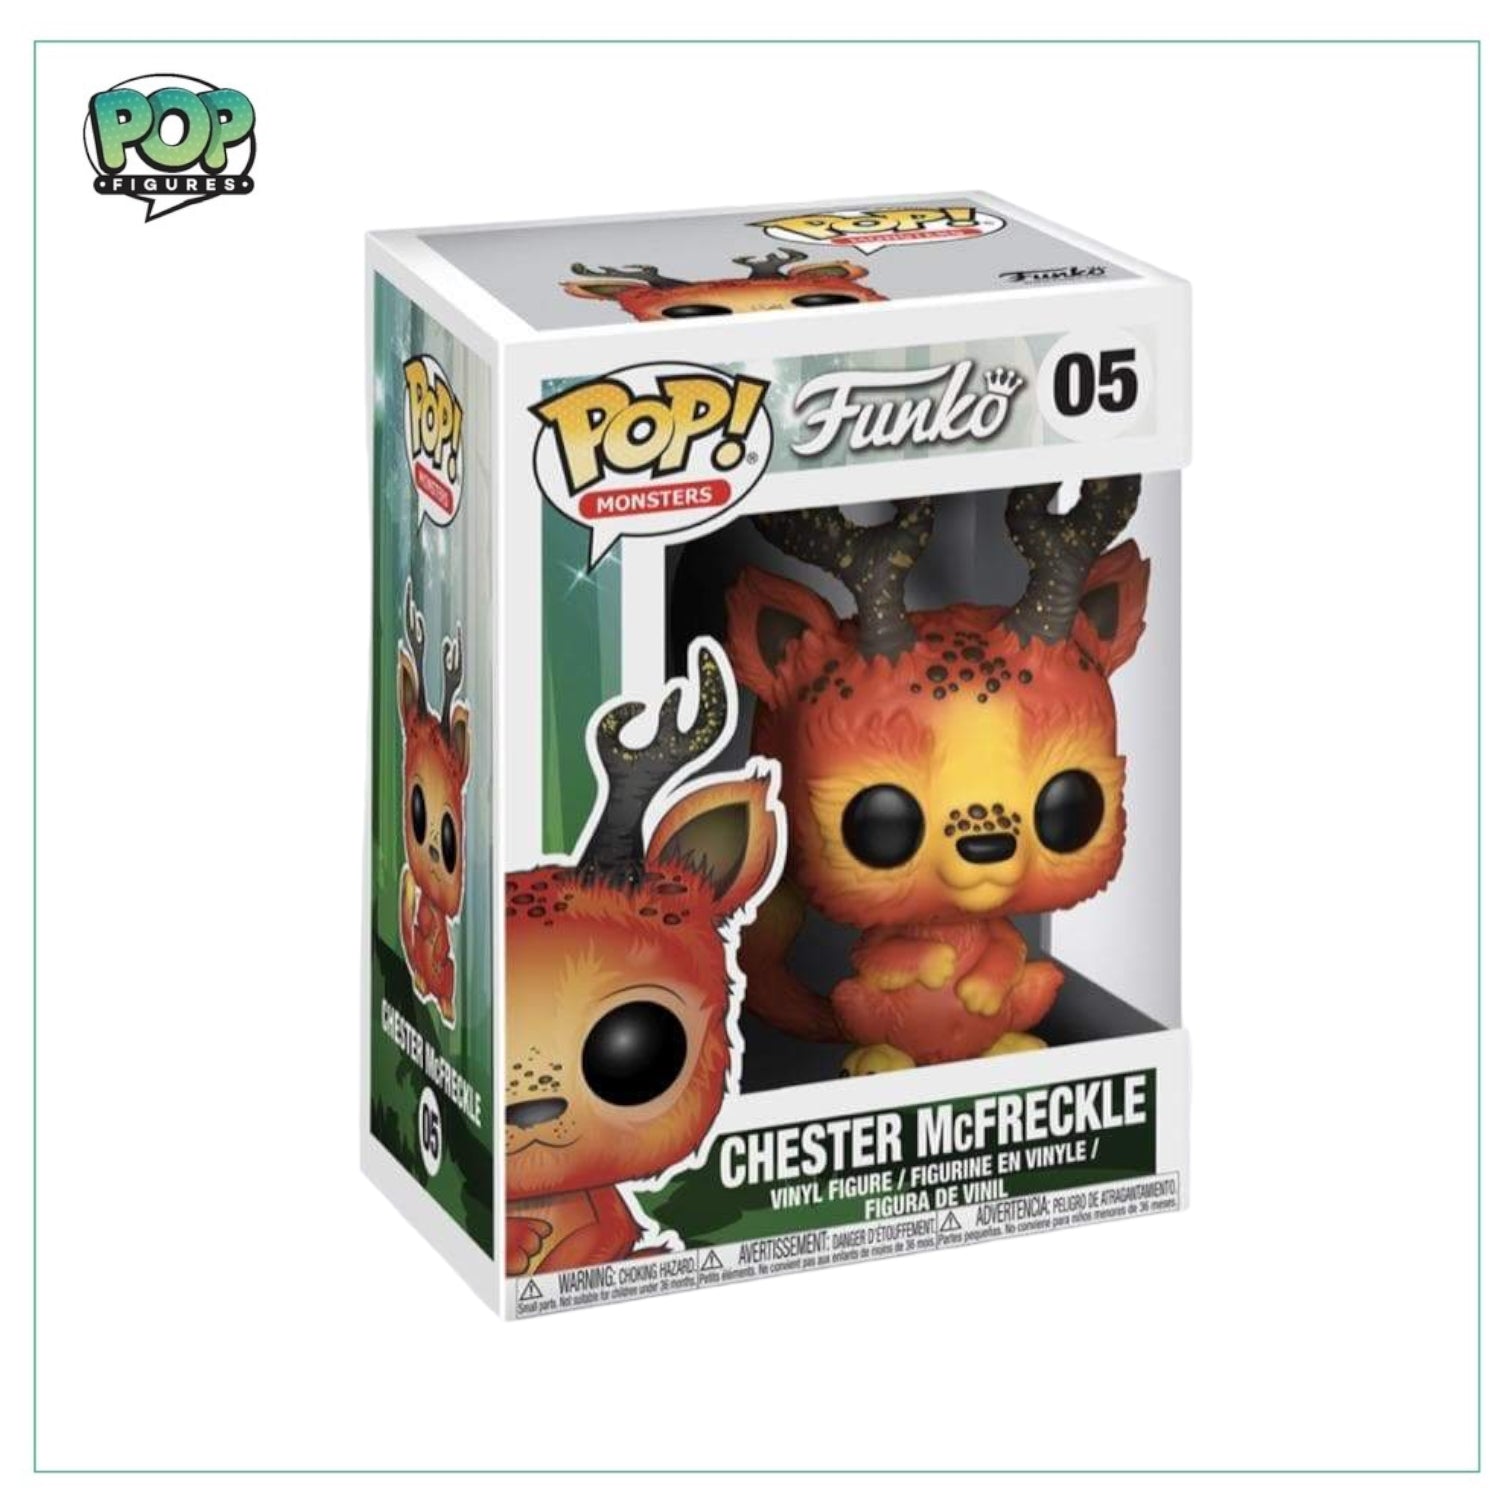 Chester McFreckle #05 Funko Pop! - Wetmore Forest